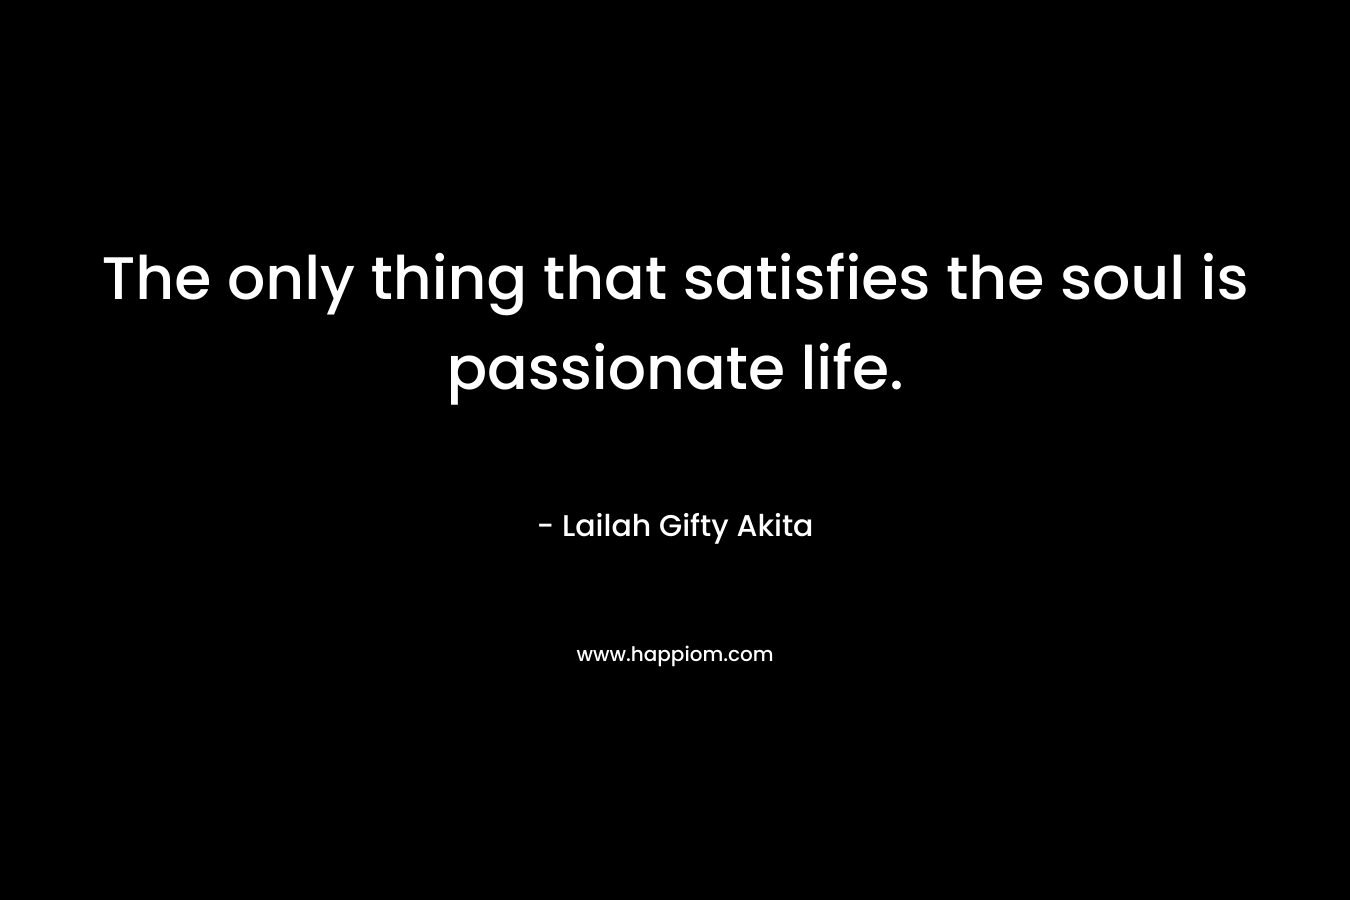 The only thing that satisfies the soul is passionate life.